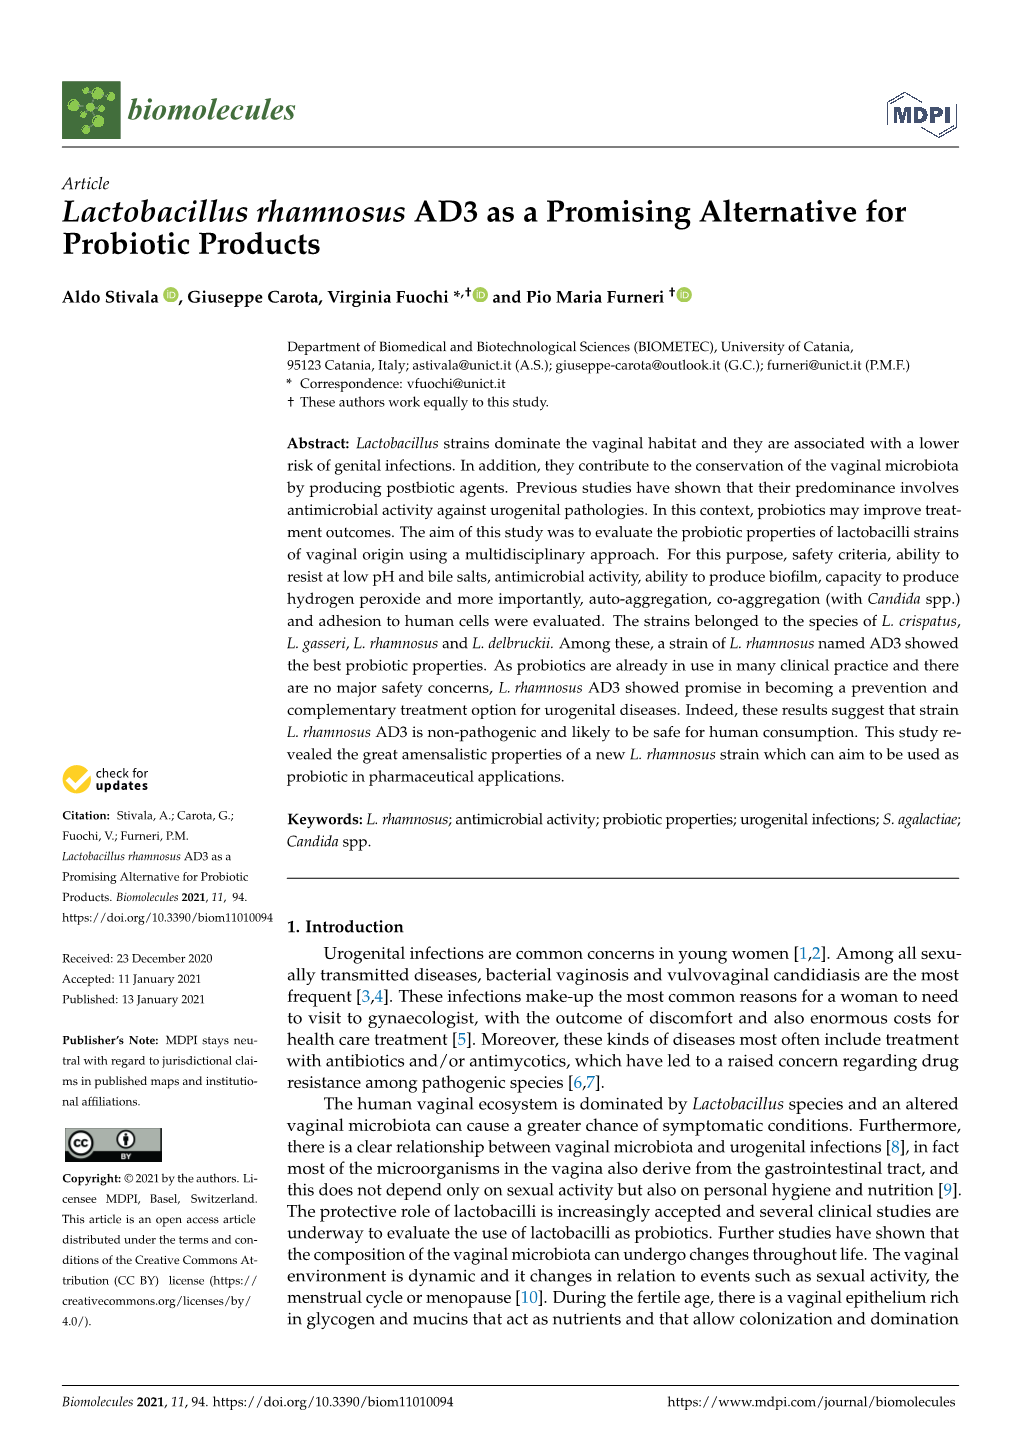 Lactobacillus Rhamnosus AD3 As a Promising Alternative for Probiotic Products